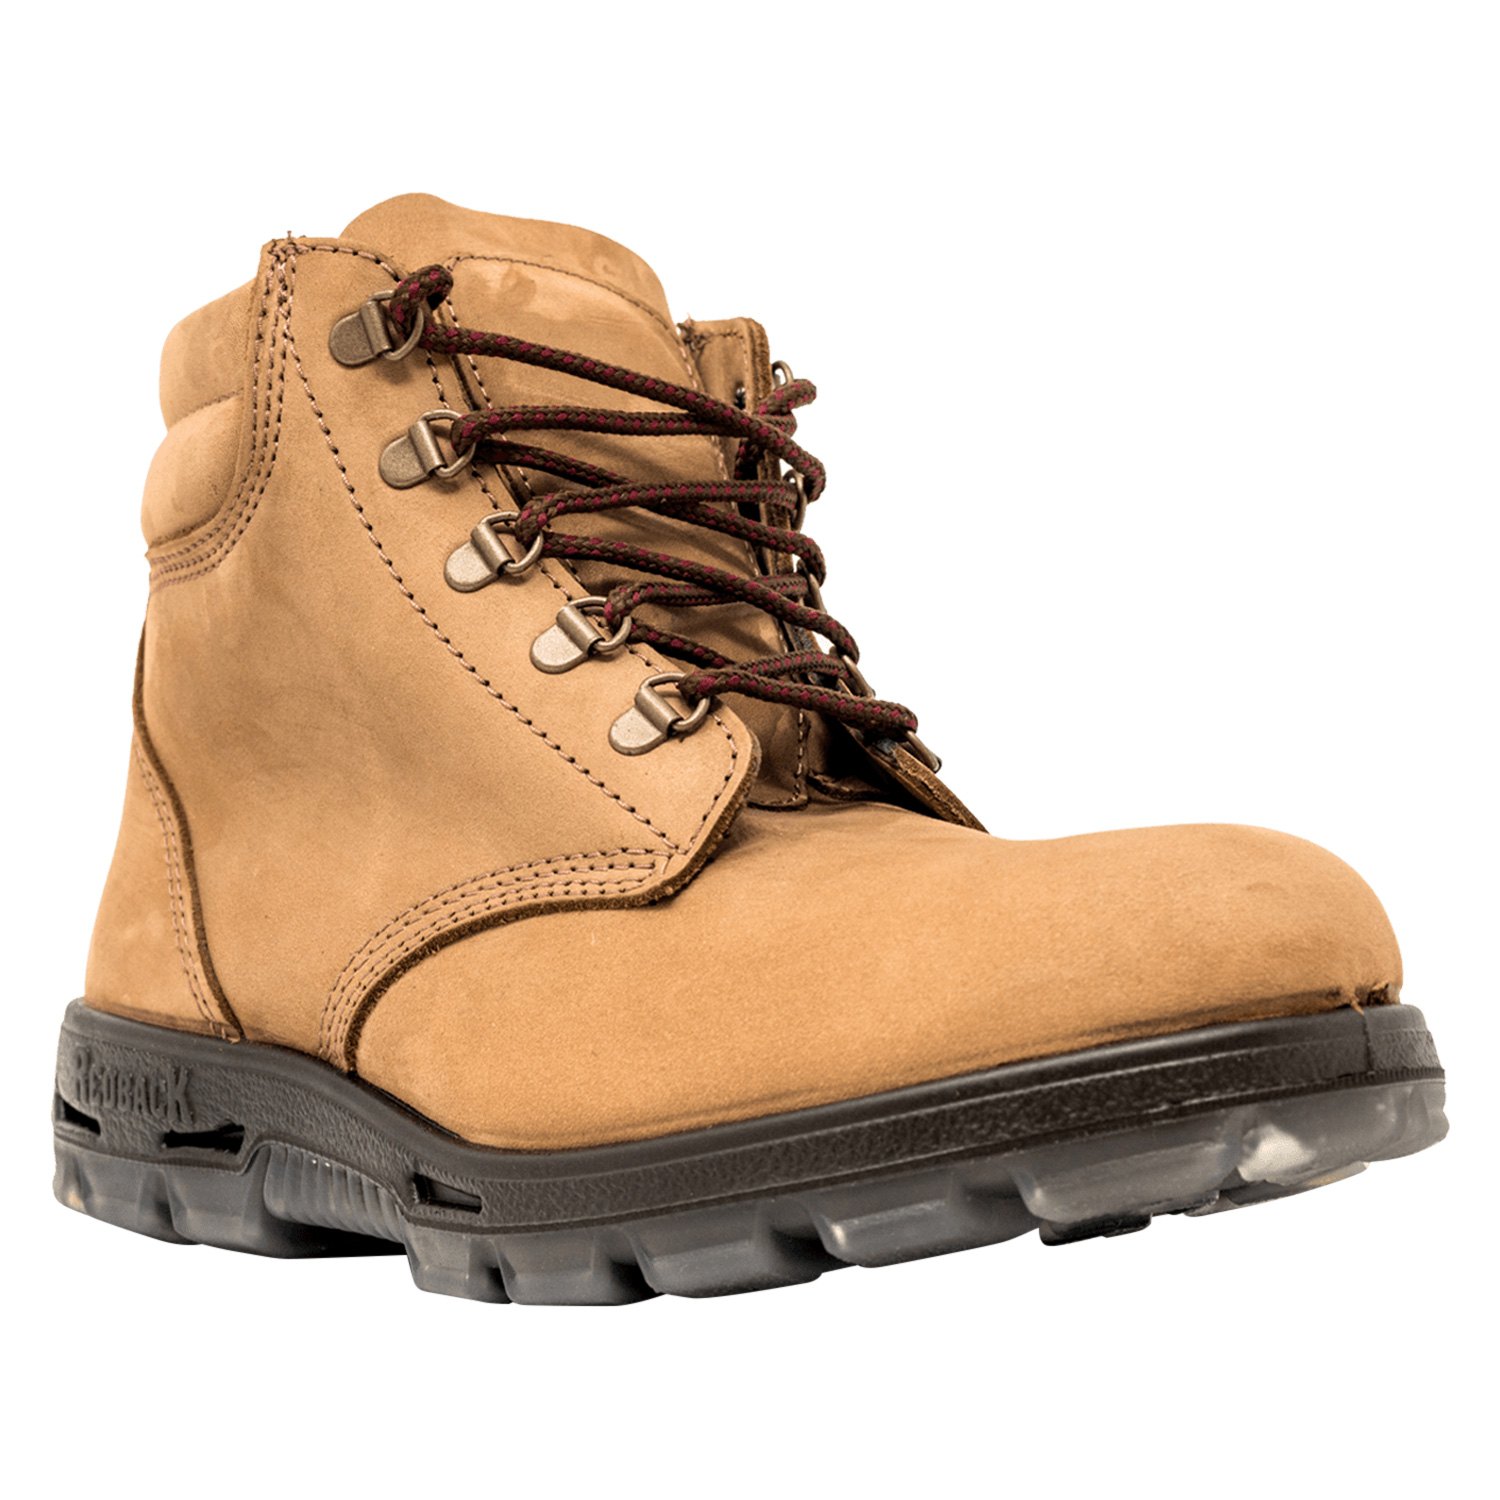 Redback Boots® UACH9 - Outback™ 10 